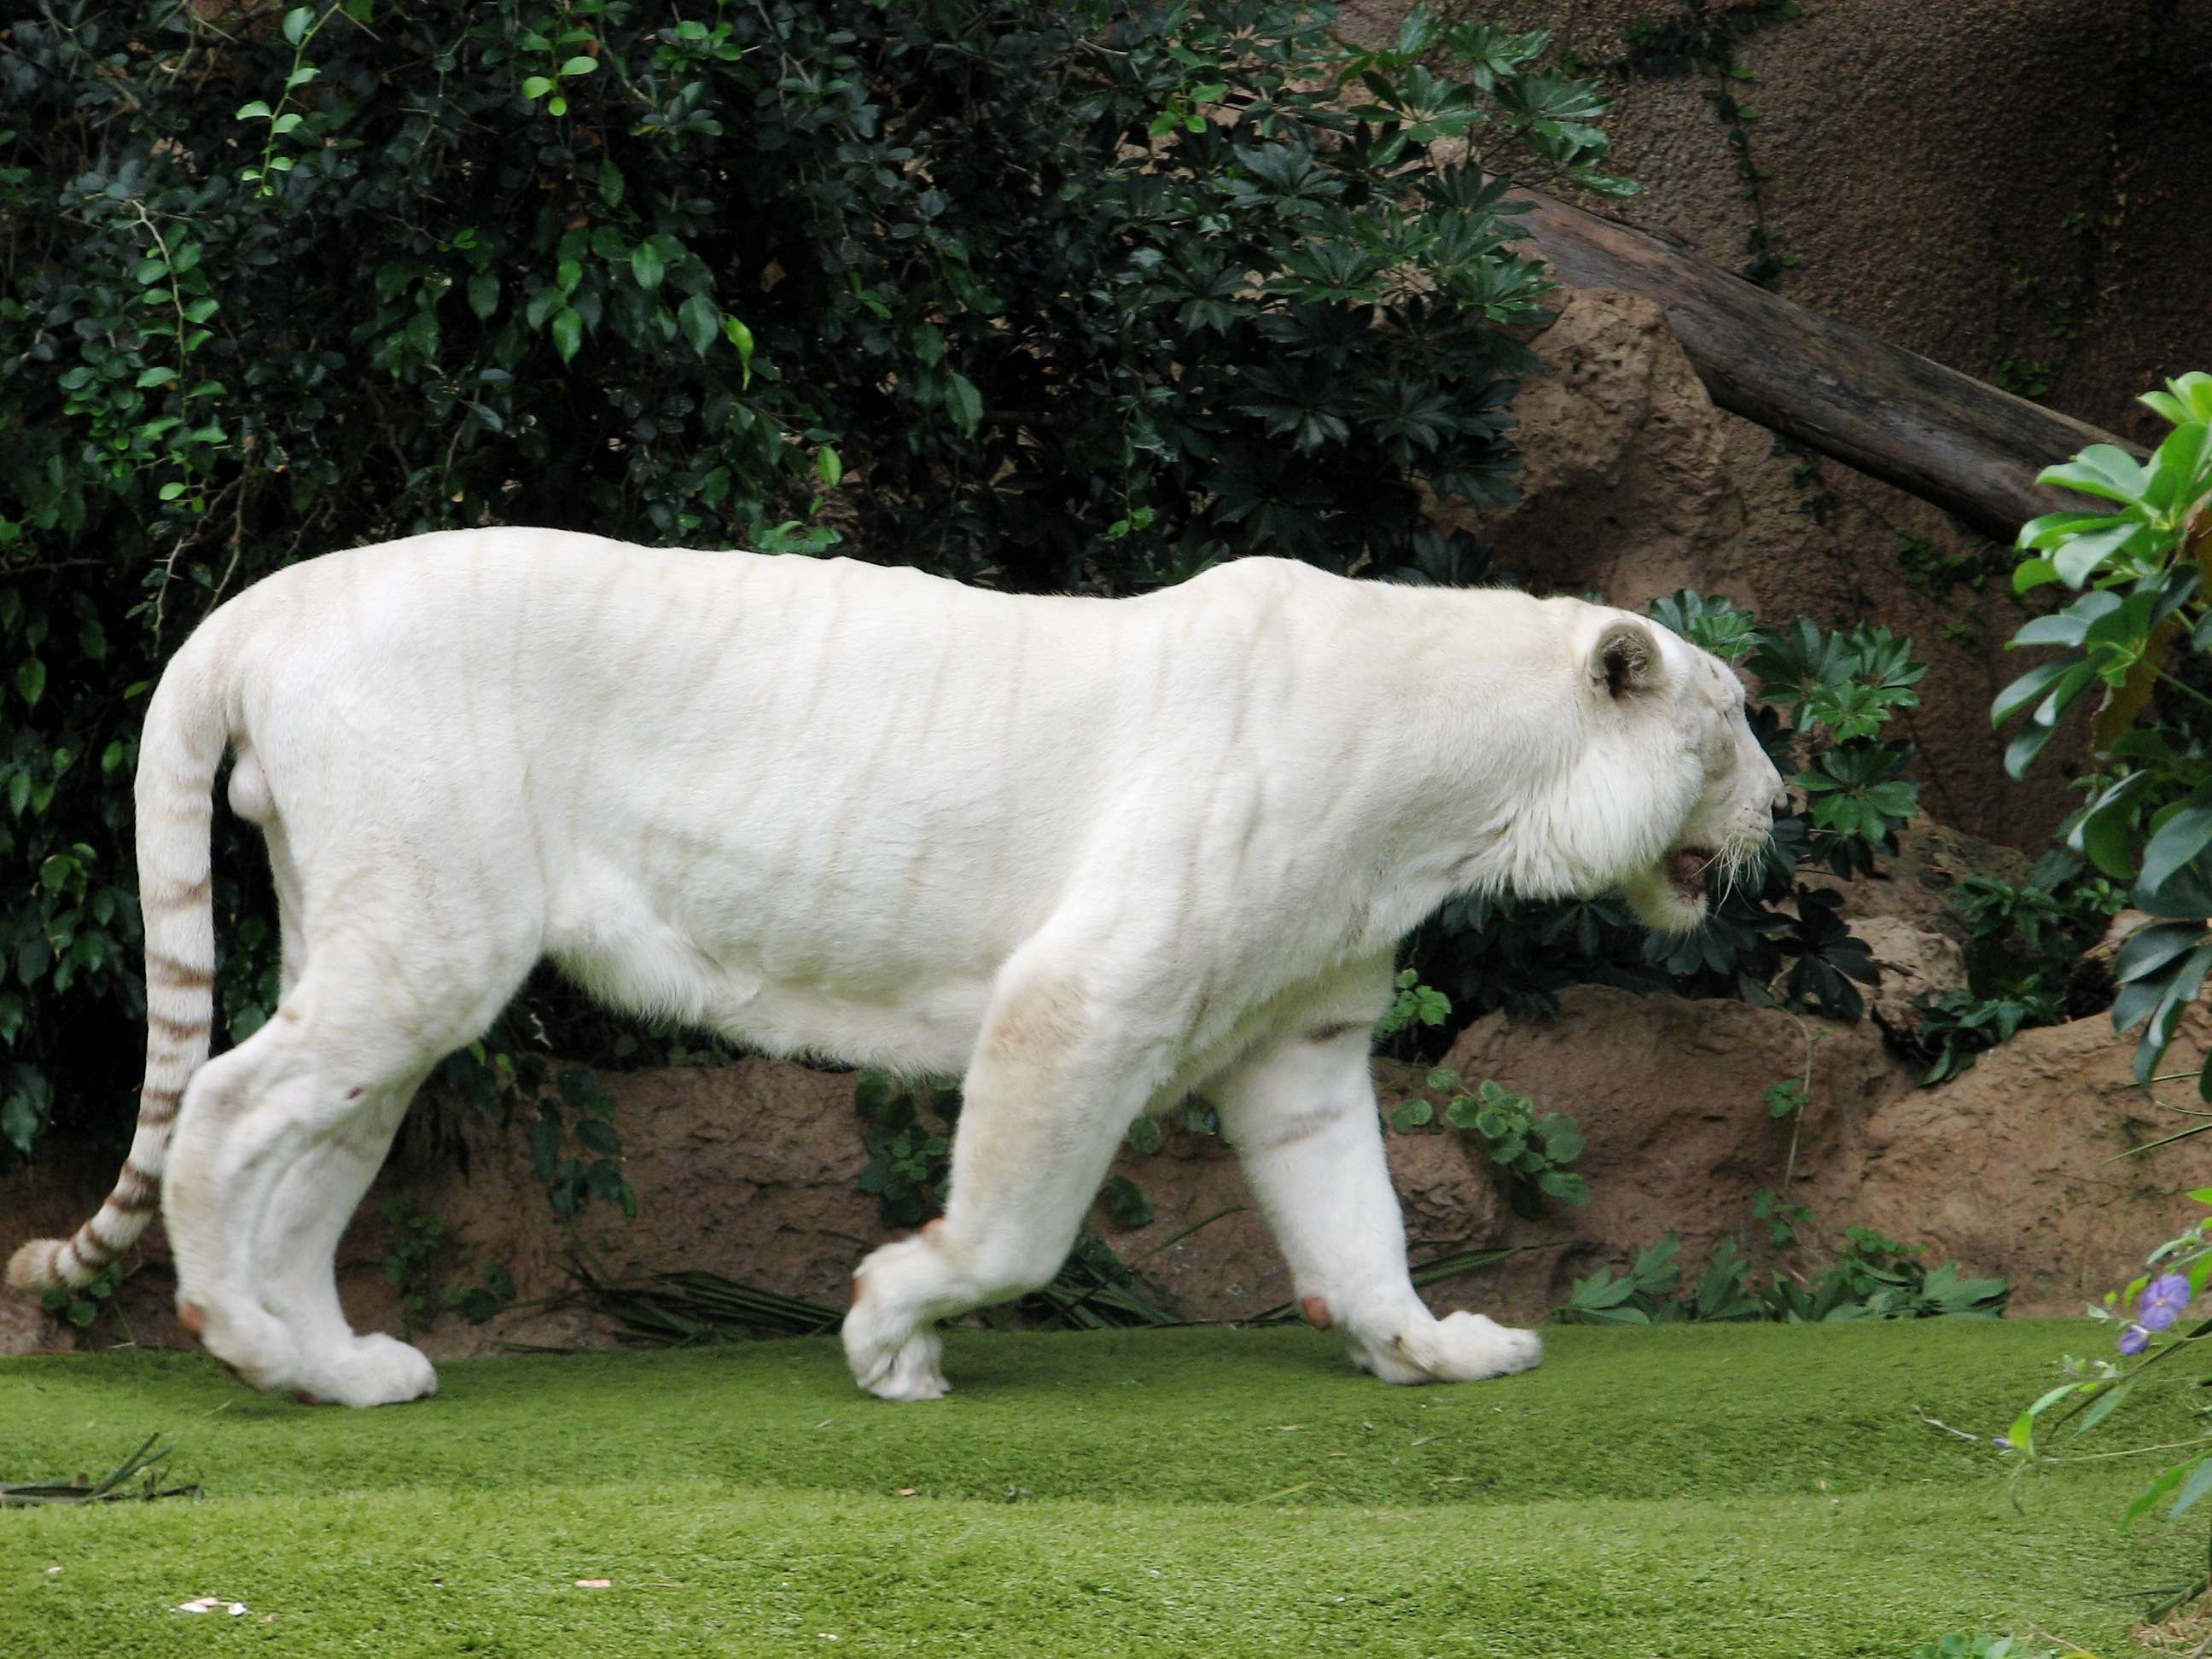 White Tigers | Life in Captivity